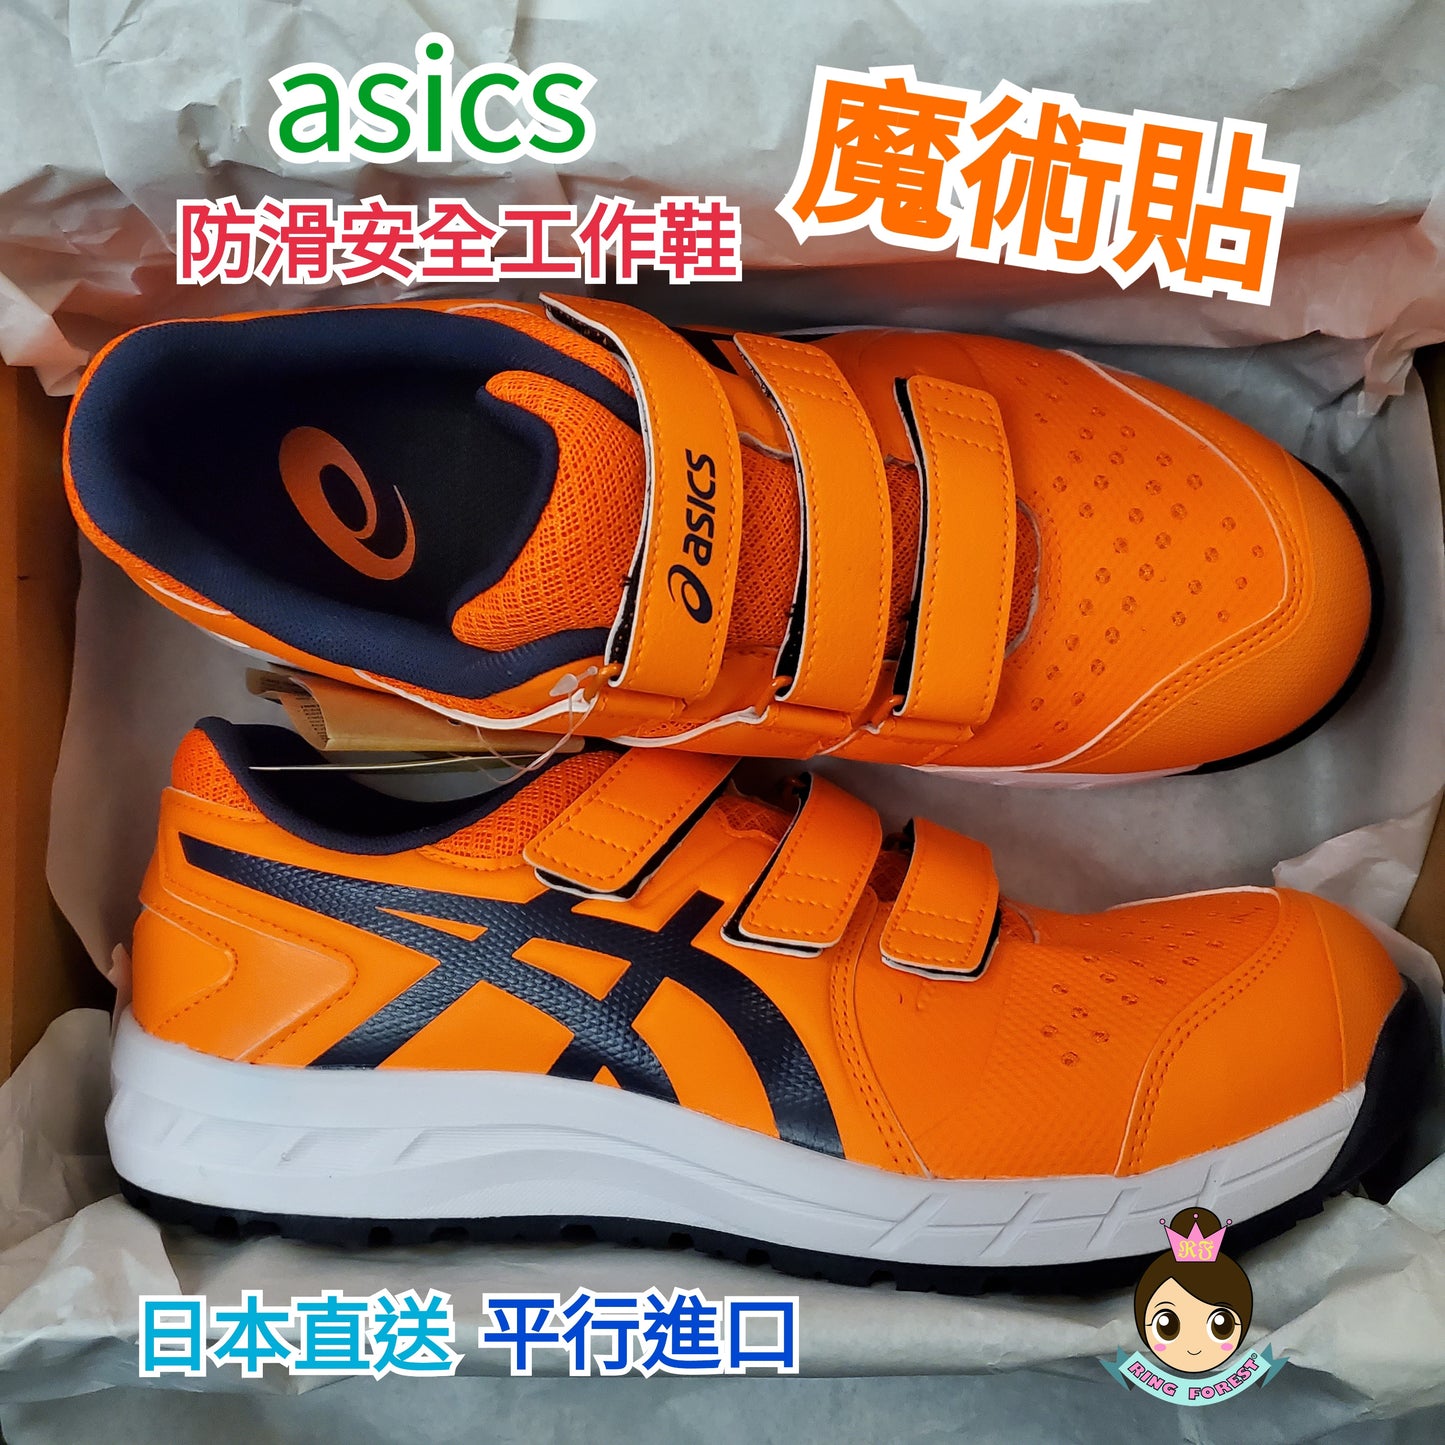 🎌Direct delivery from Japan📢Order ASICS ultra-light anti-slip safety work shoes for construction sites, kitchens, transport trucks, room repairs, travel Jieshan factory motorcycles RingForest CP112